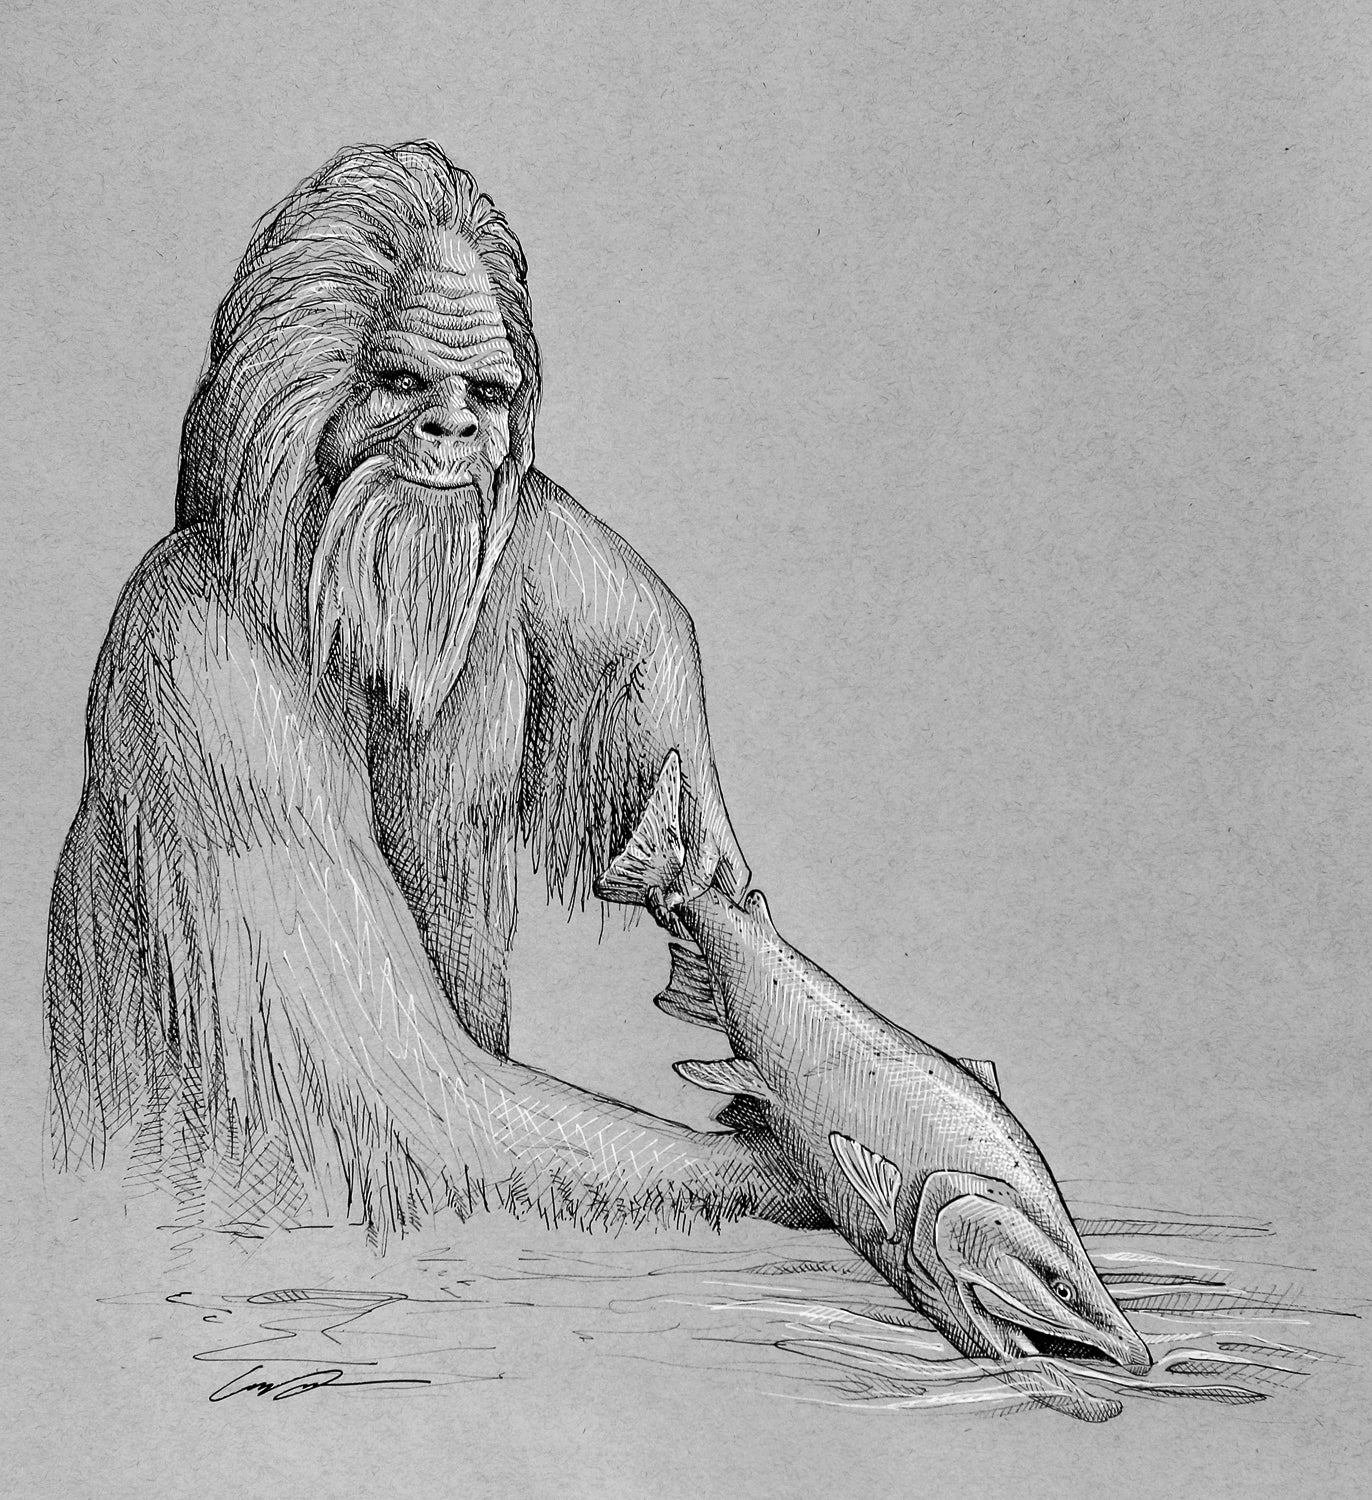 A black and white drawing that features a drawing of a sasquatch holding a trout in the water